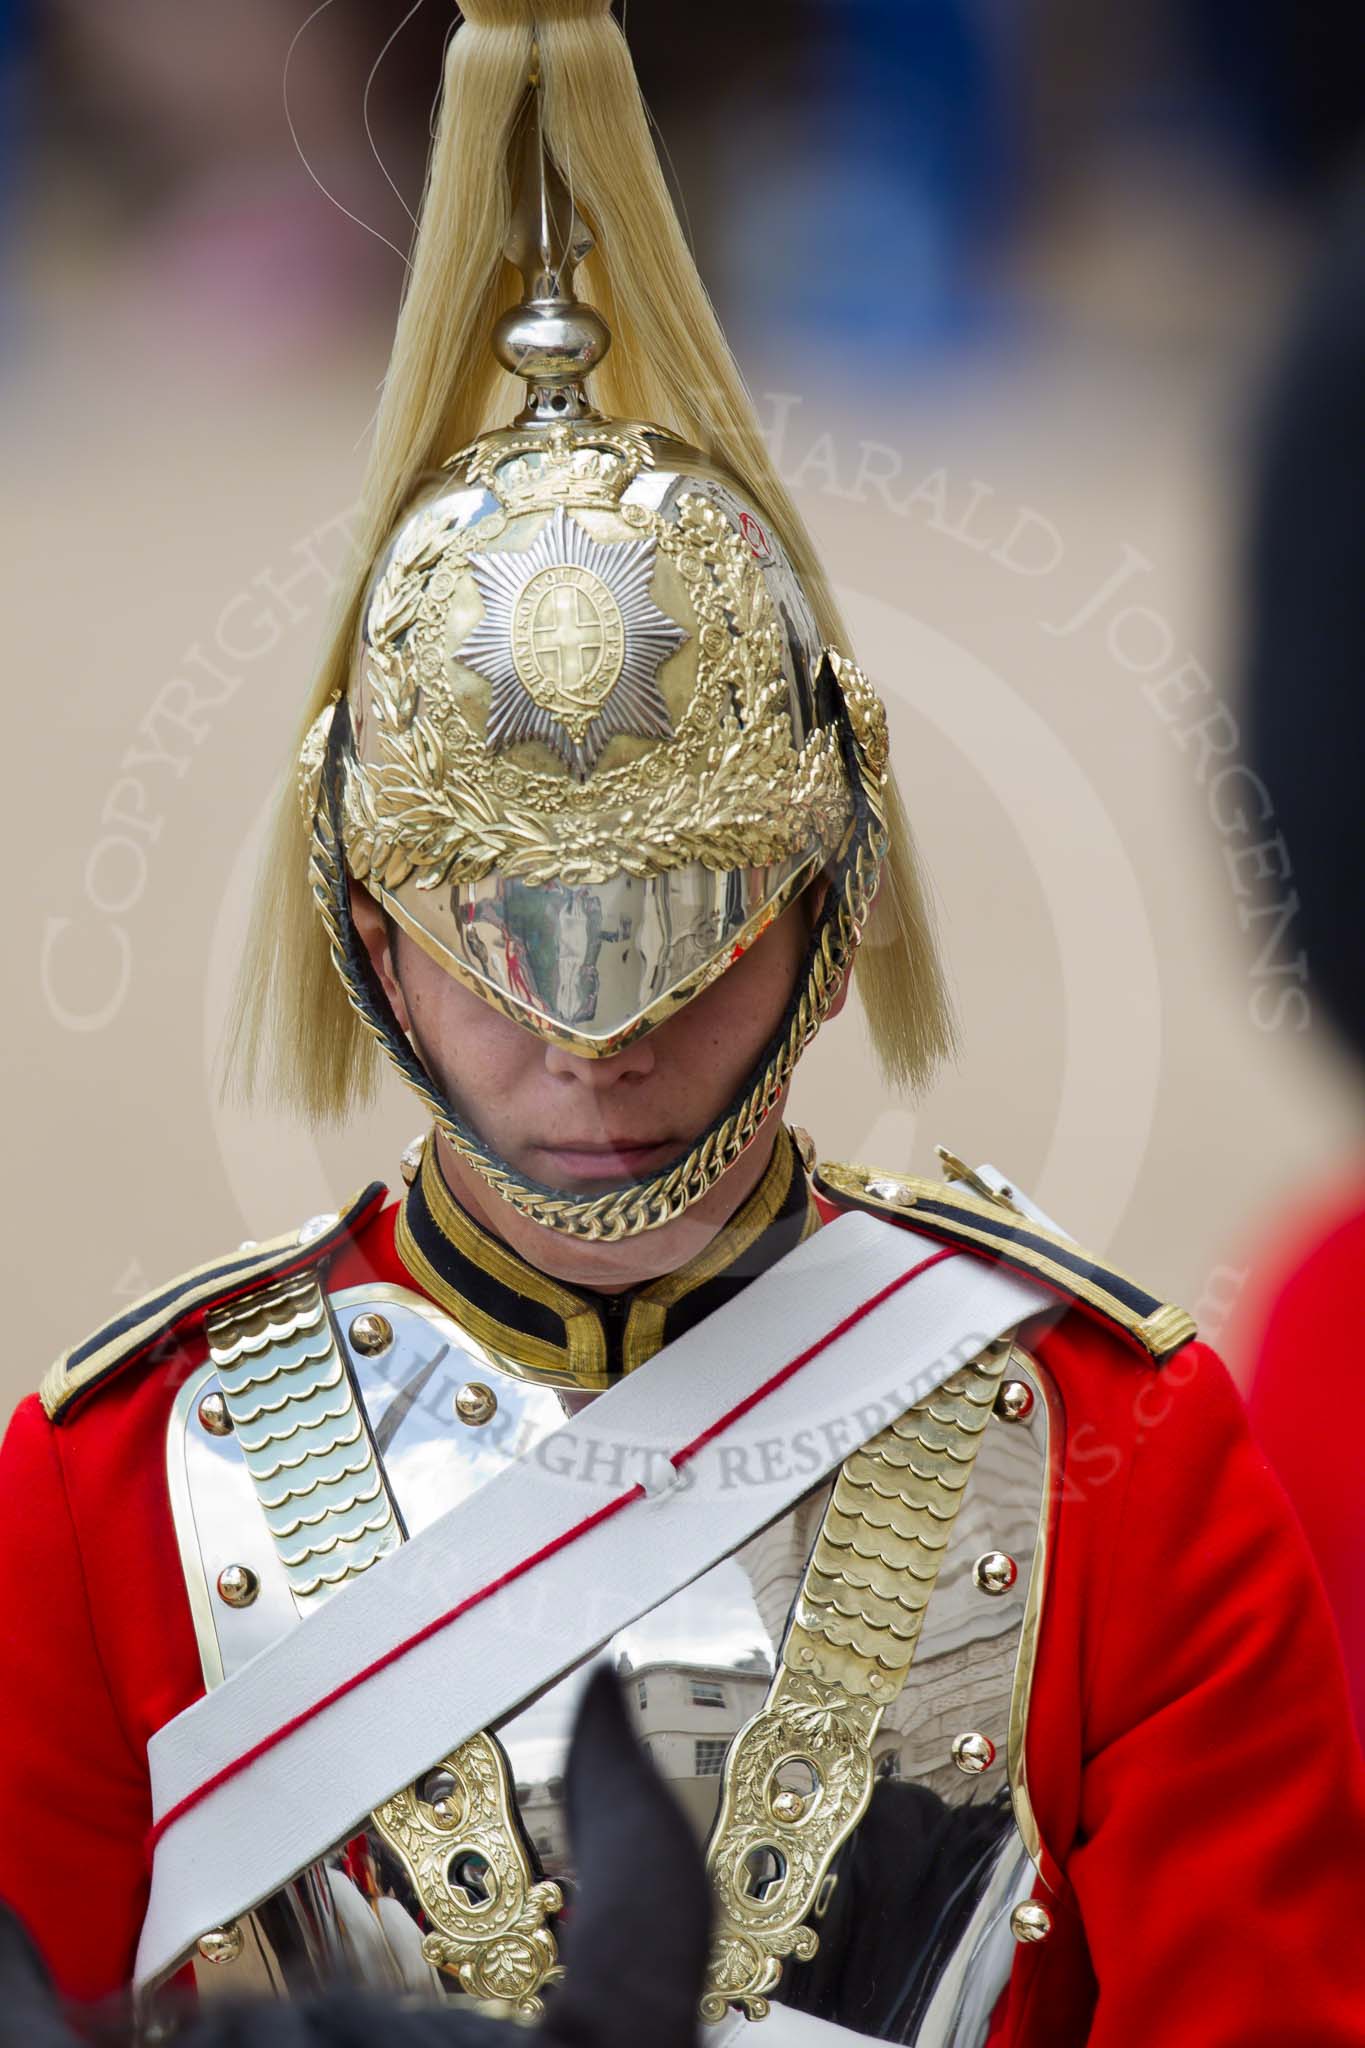 Trooping the Colour 2010: One of the four Troopers of the Life Guards from the end of the Royal Procession..
Horse Guards Parade, Westminster,
London SW1,
Greater London,
United Kingdom,
on 12 June 2010 at 11:03, image #78